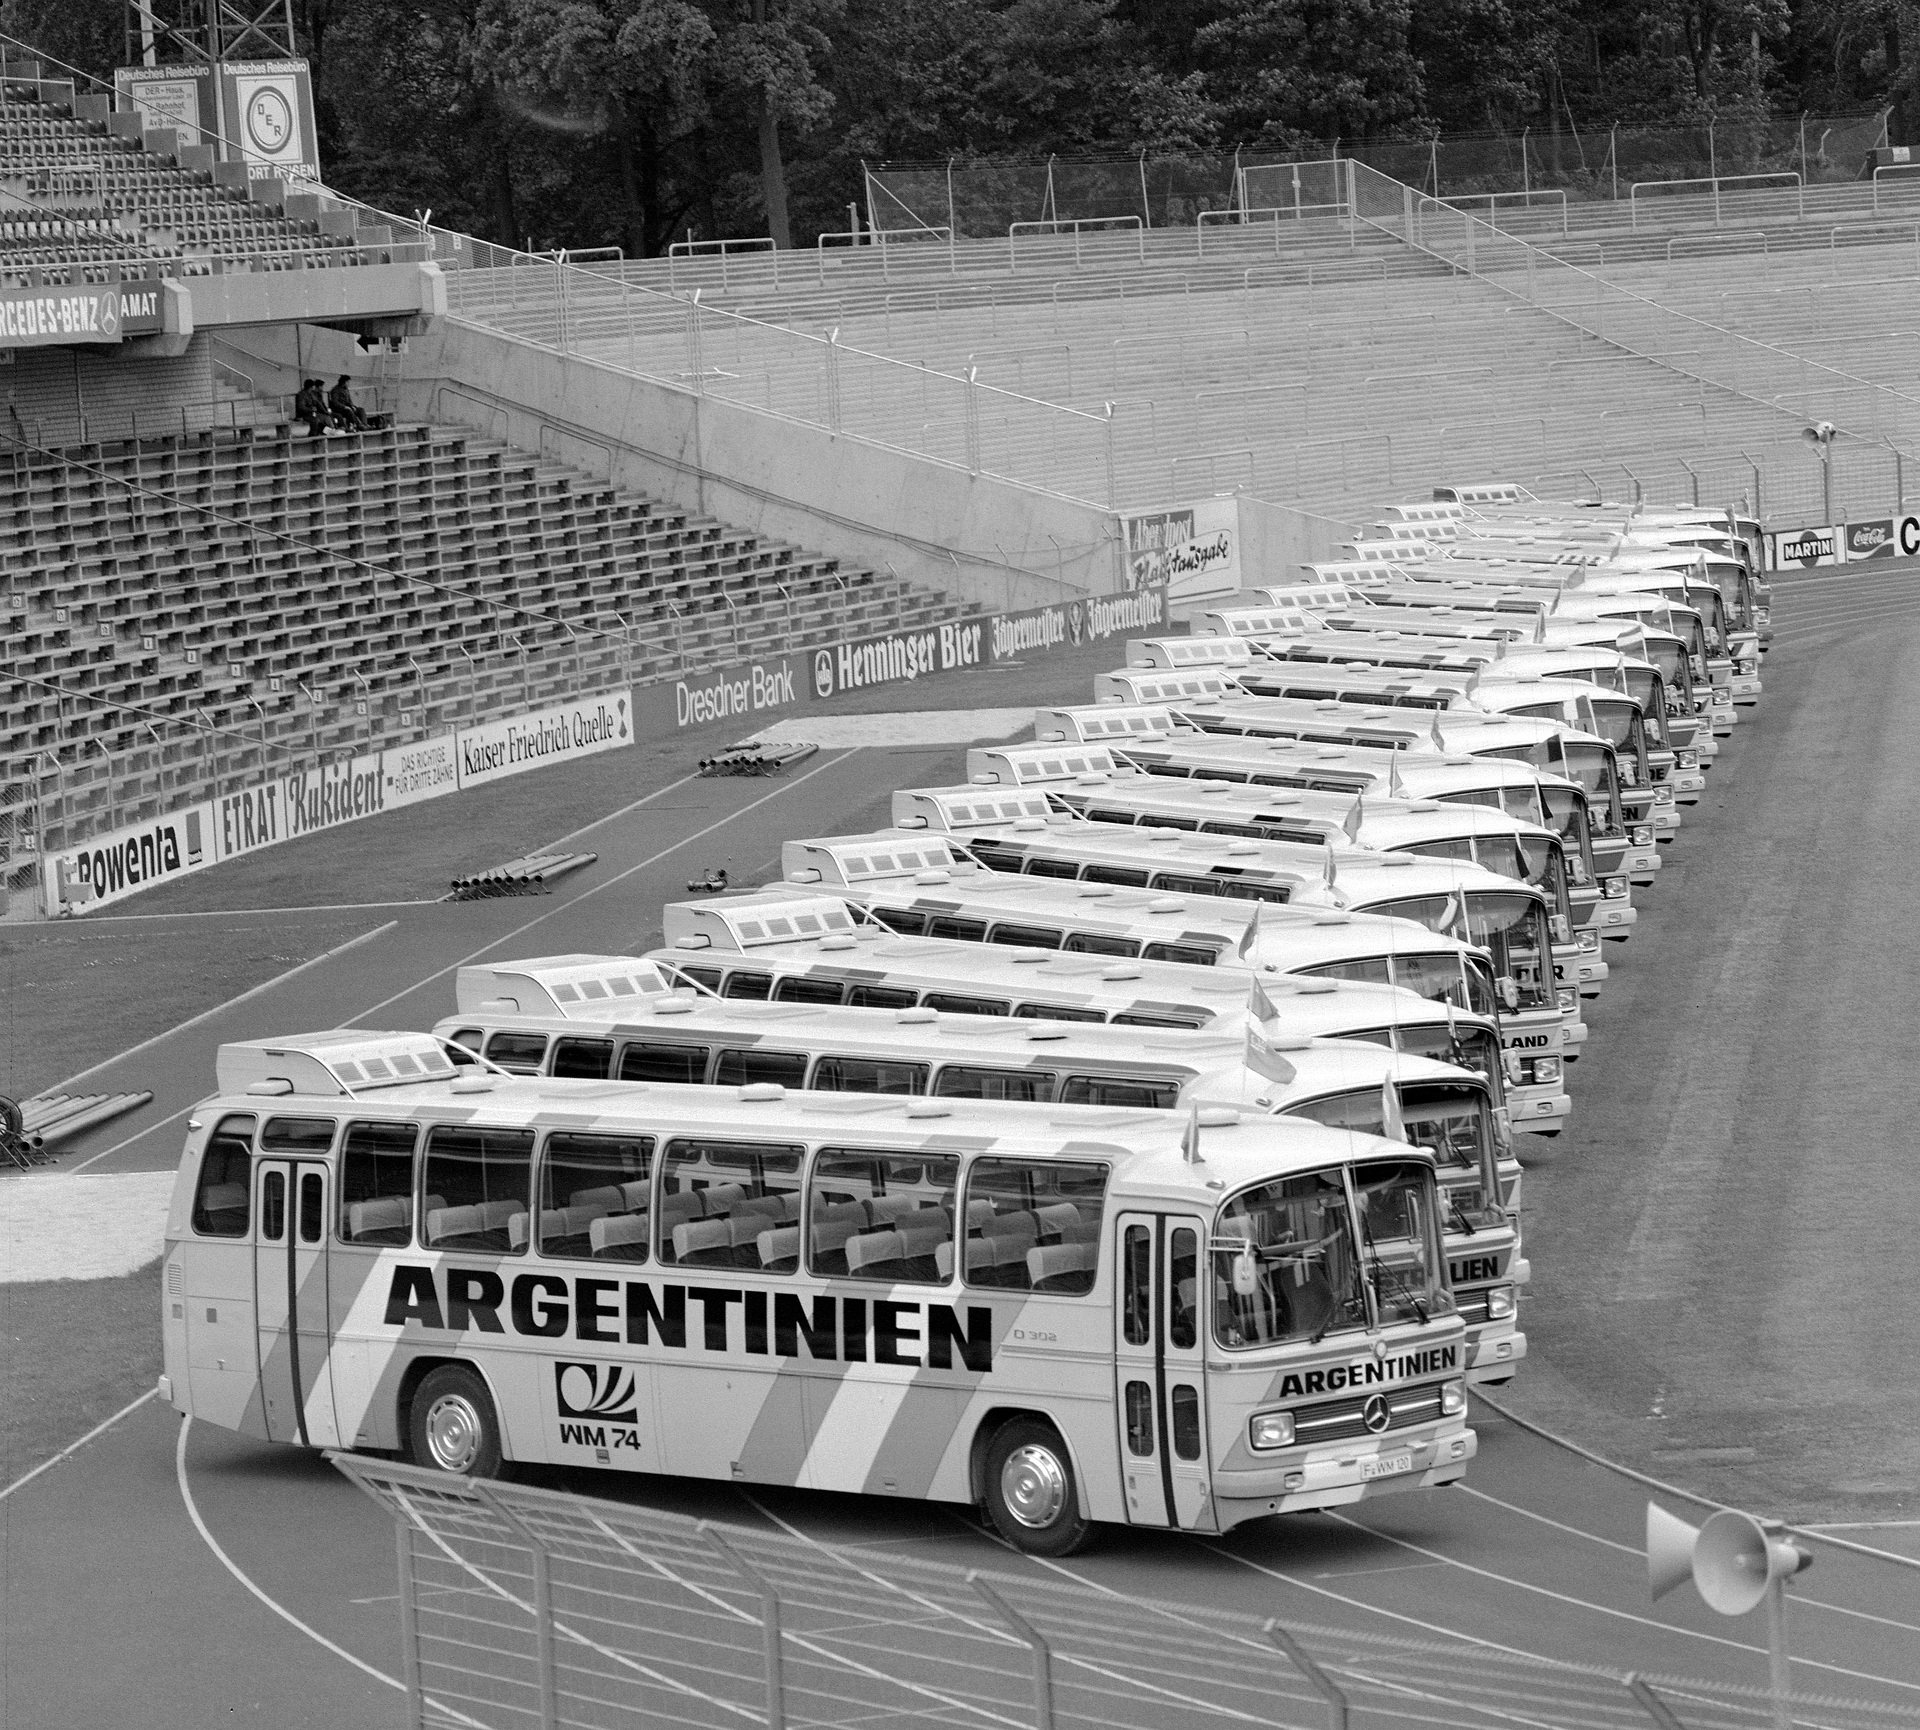 Maximum bus comfort for the 1974 World Cup footballers